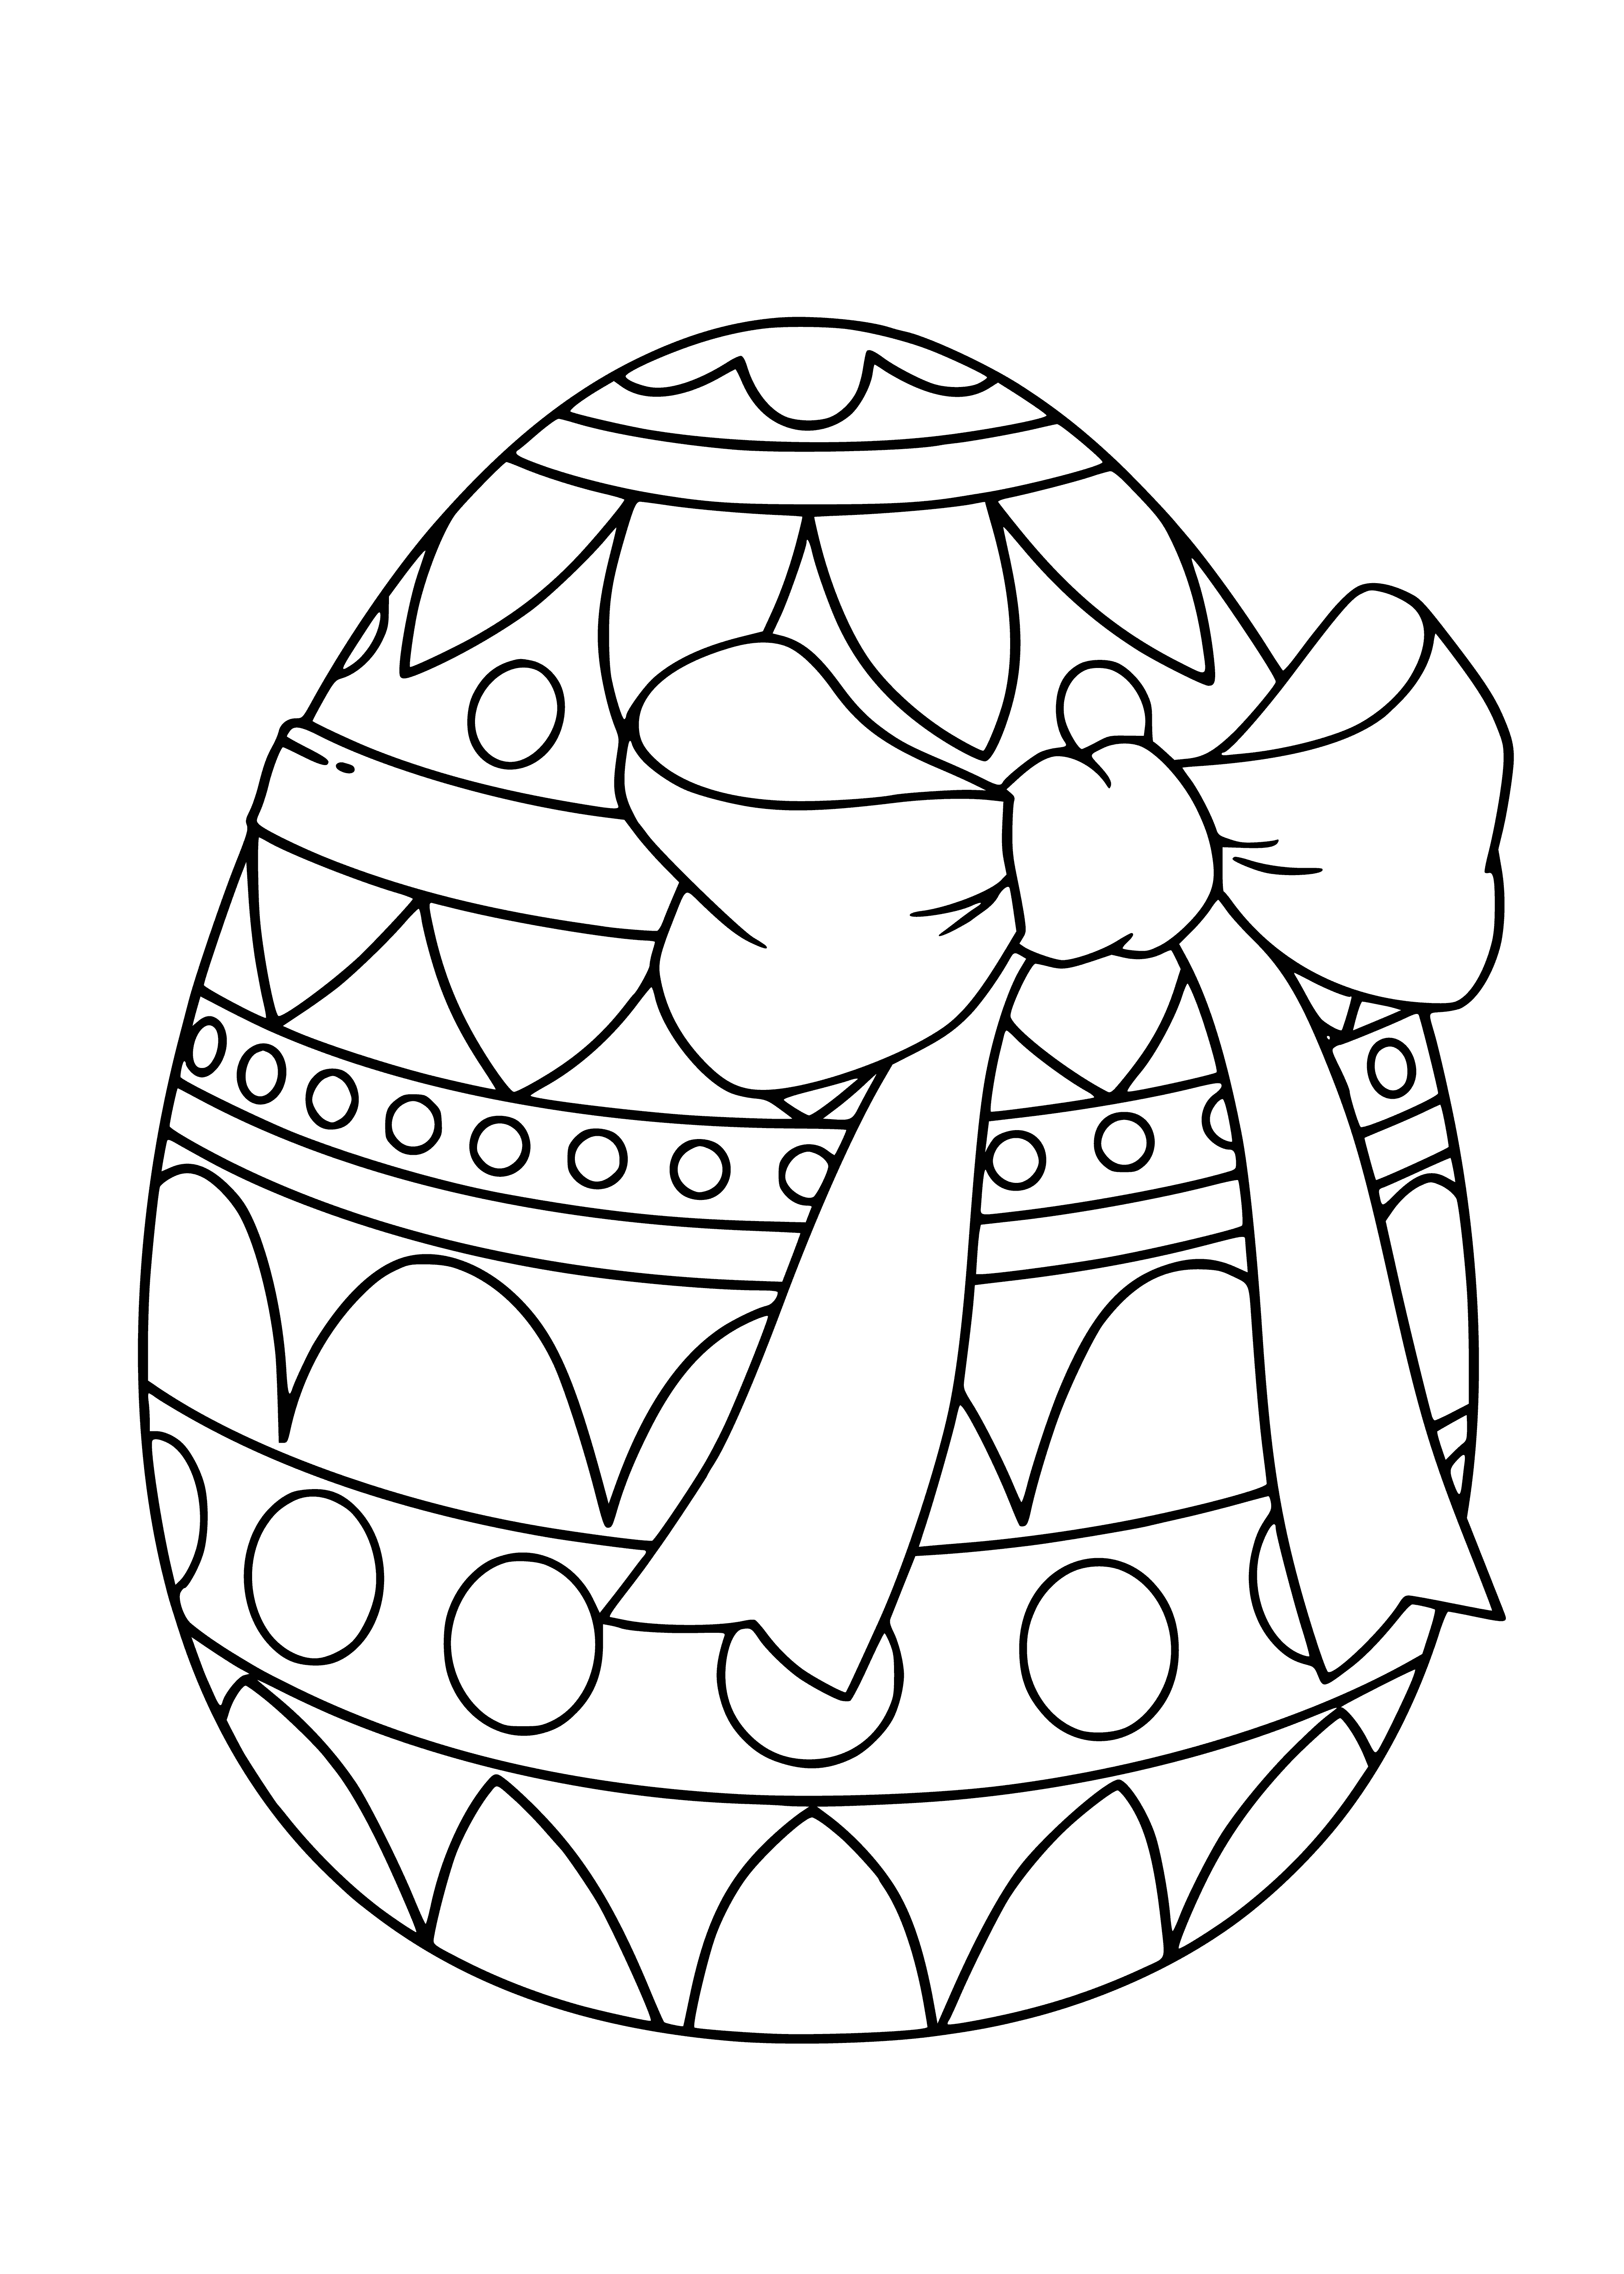 coloring page: Egg is yellow & striped, with green button on side. #EasterDecoration